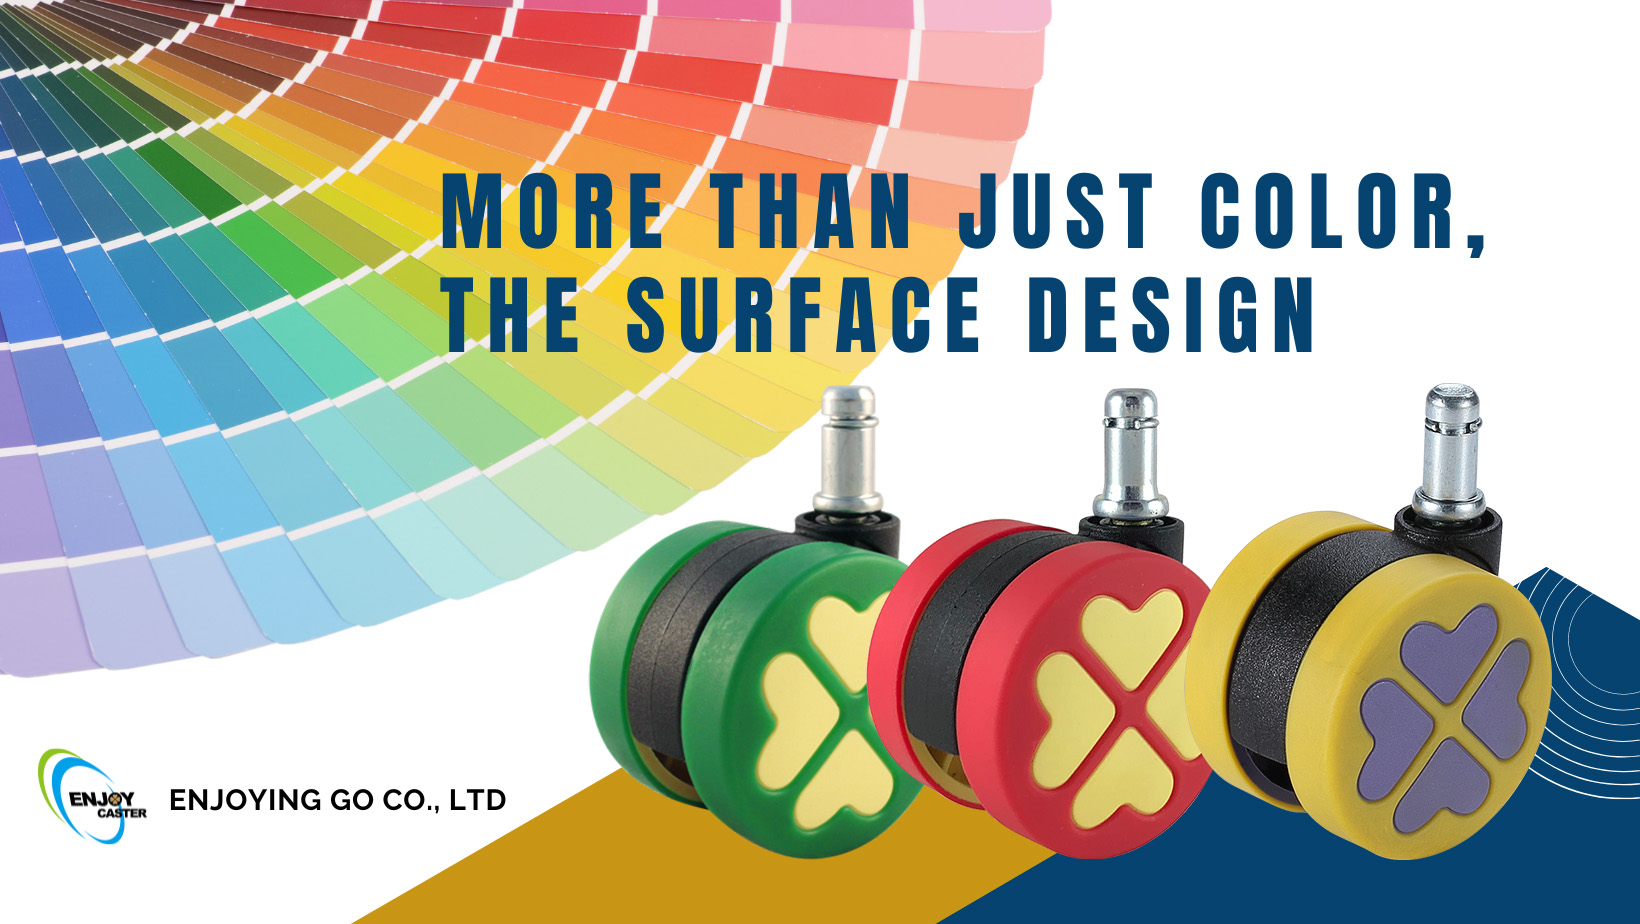 More than just color, the surface design